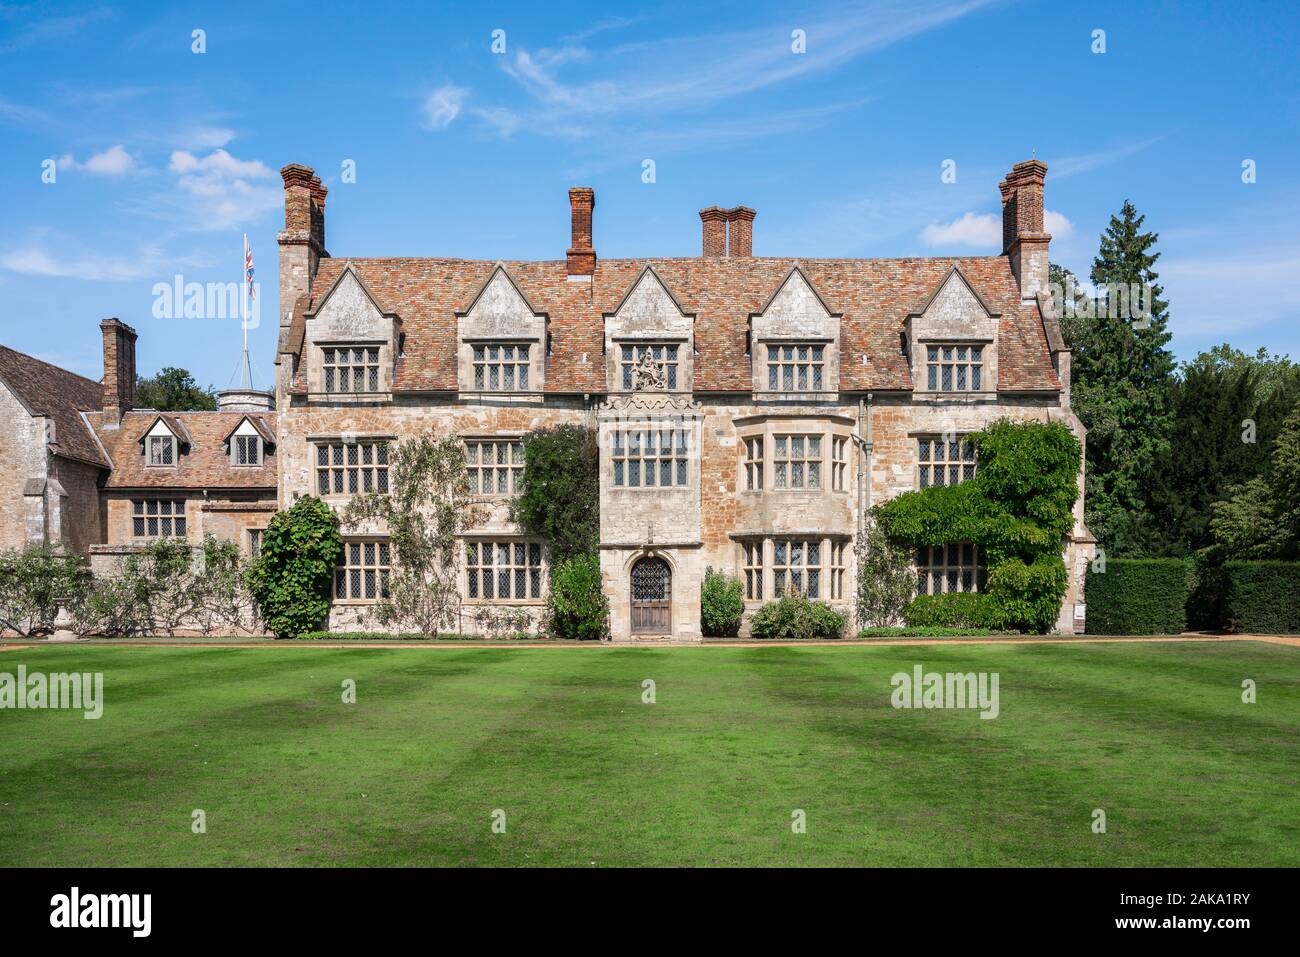 Anglesey Abbey, view of the south front of Anglesey Abbey, a 17th century country house in the village of Lode, Cambridgeshire, England, UK. Stock Photo